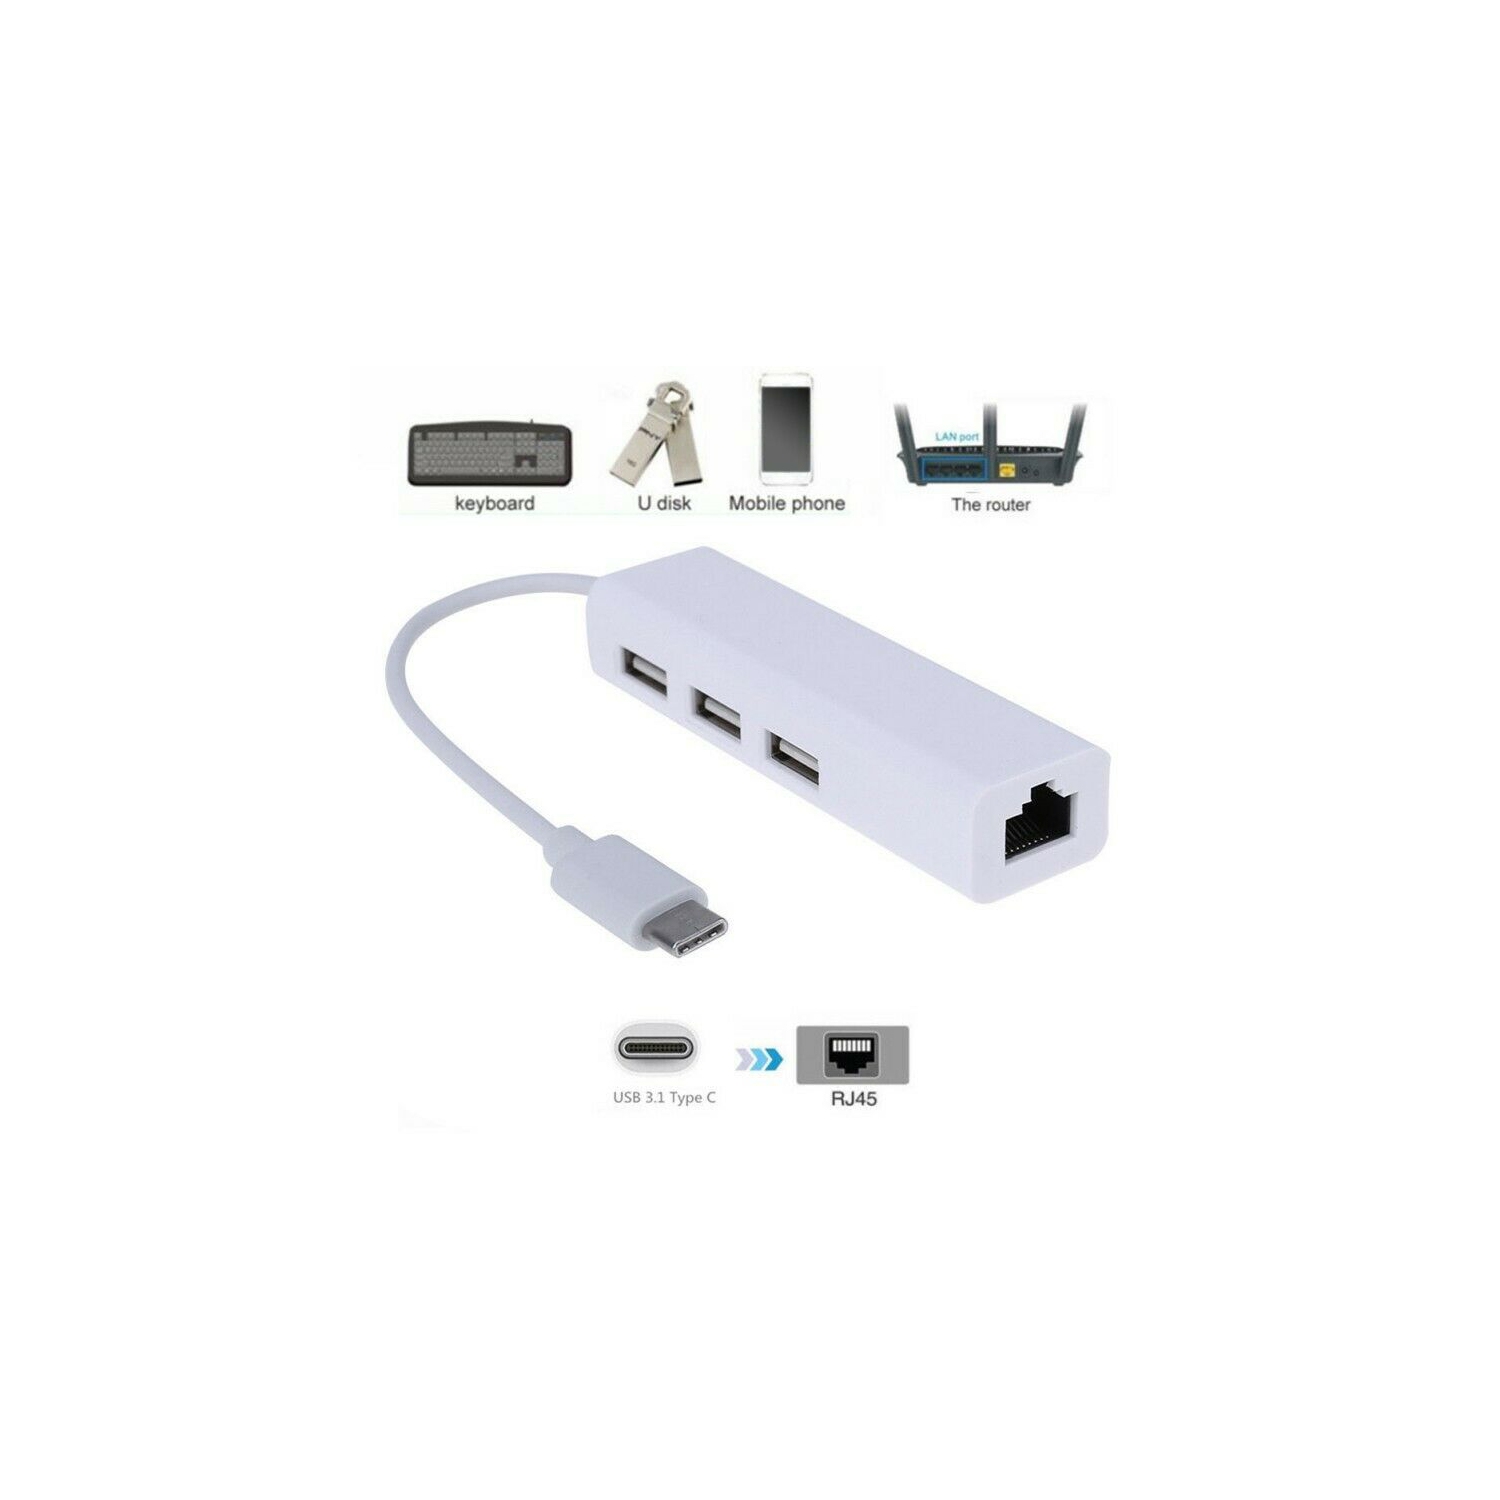 USB 3.1 USB-C Type C to 3 Ports USB Hub with RJ45 Ethernet Lan Adapter Cable for Macbook PC